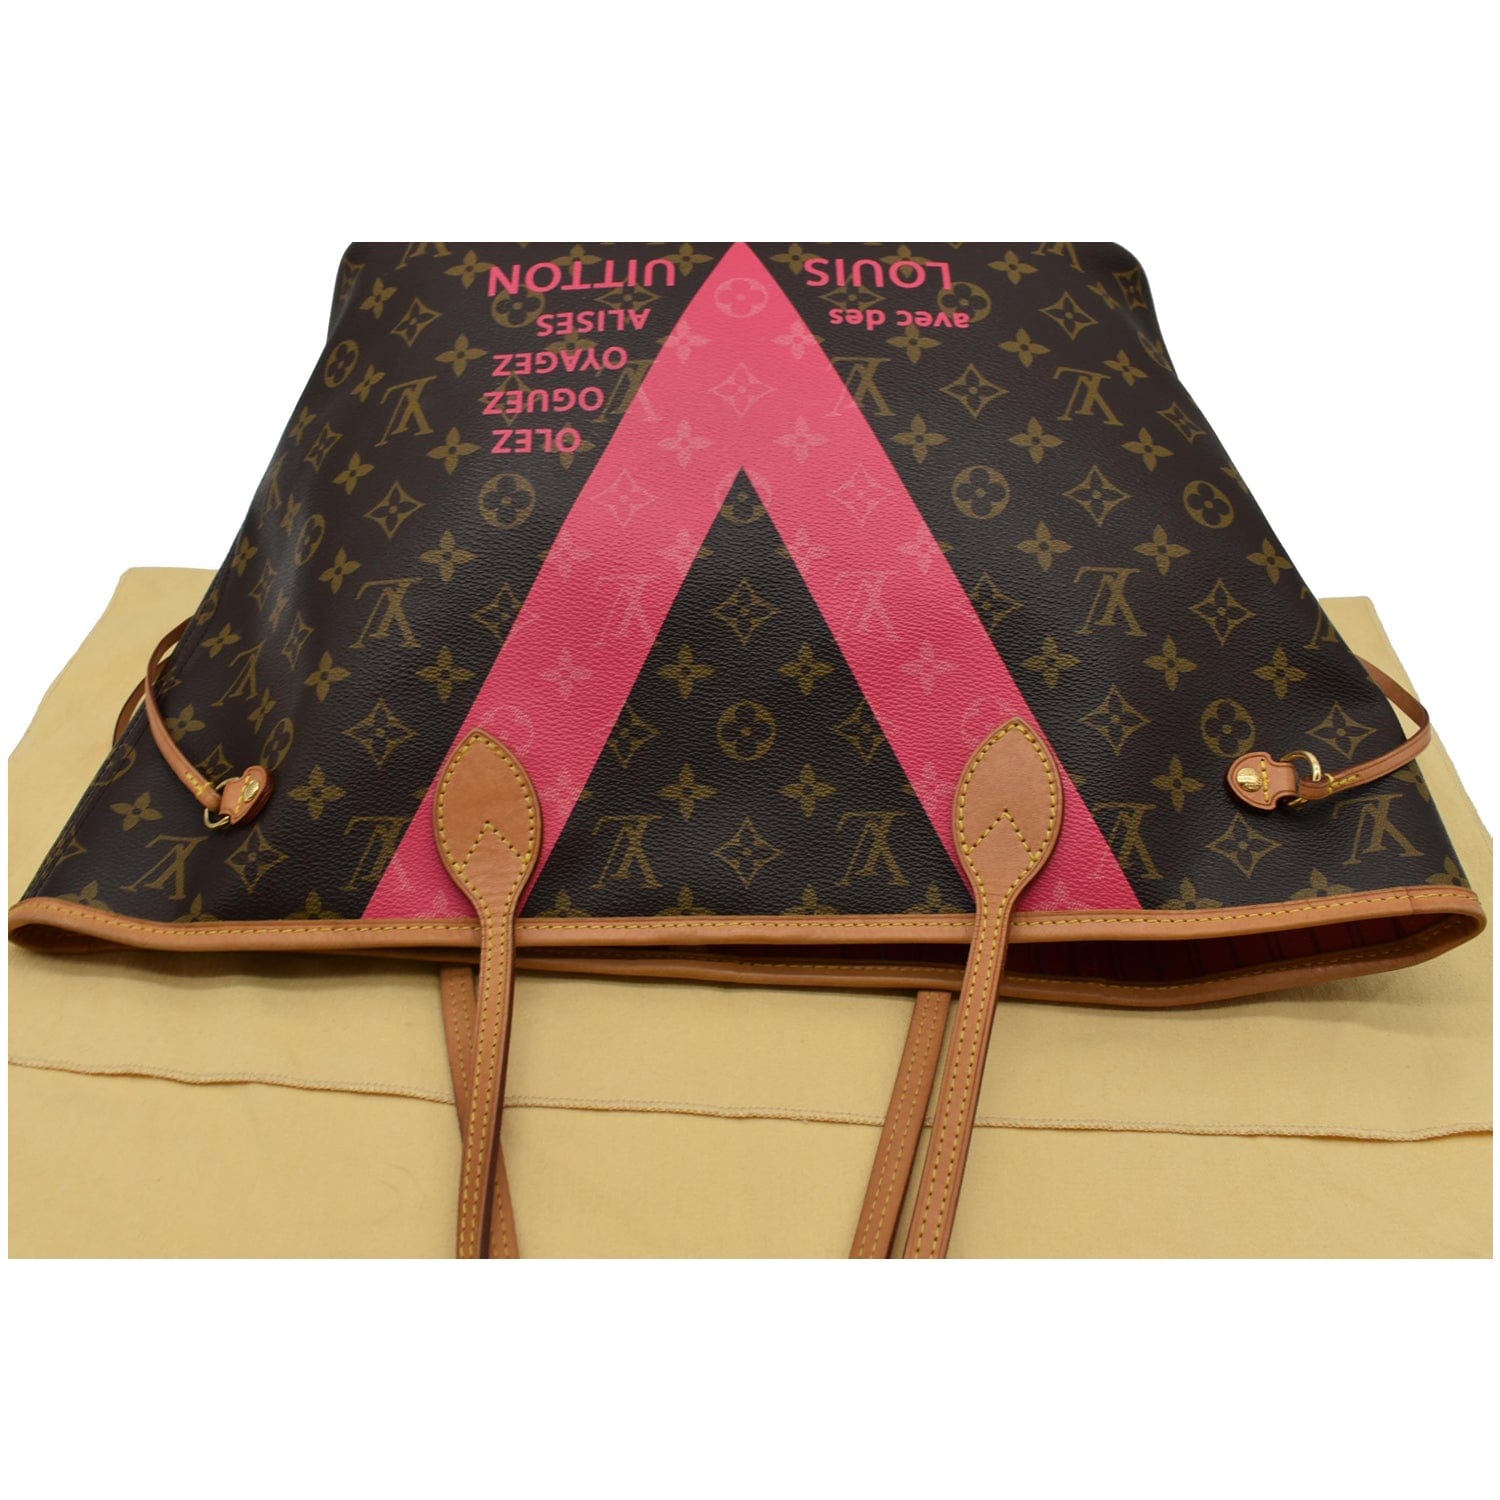 Louis Vuitton Neverfull MM Monogram Canvas 2015 Ramages Grenade Limited  Edition Print Preowned